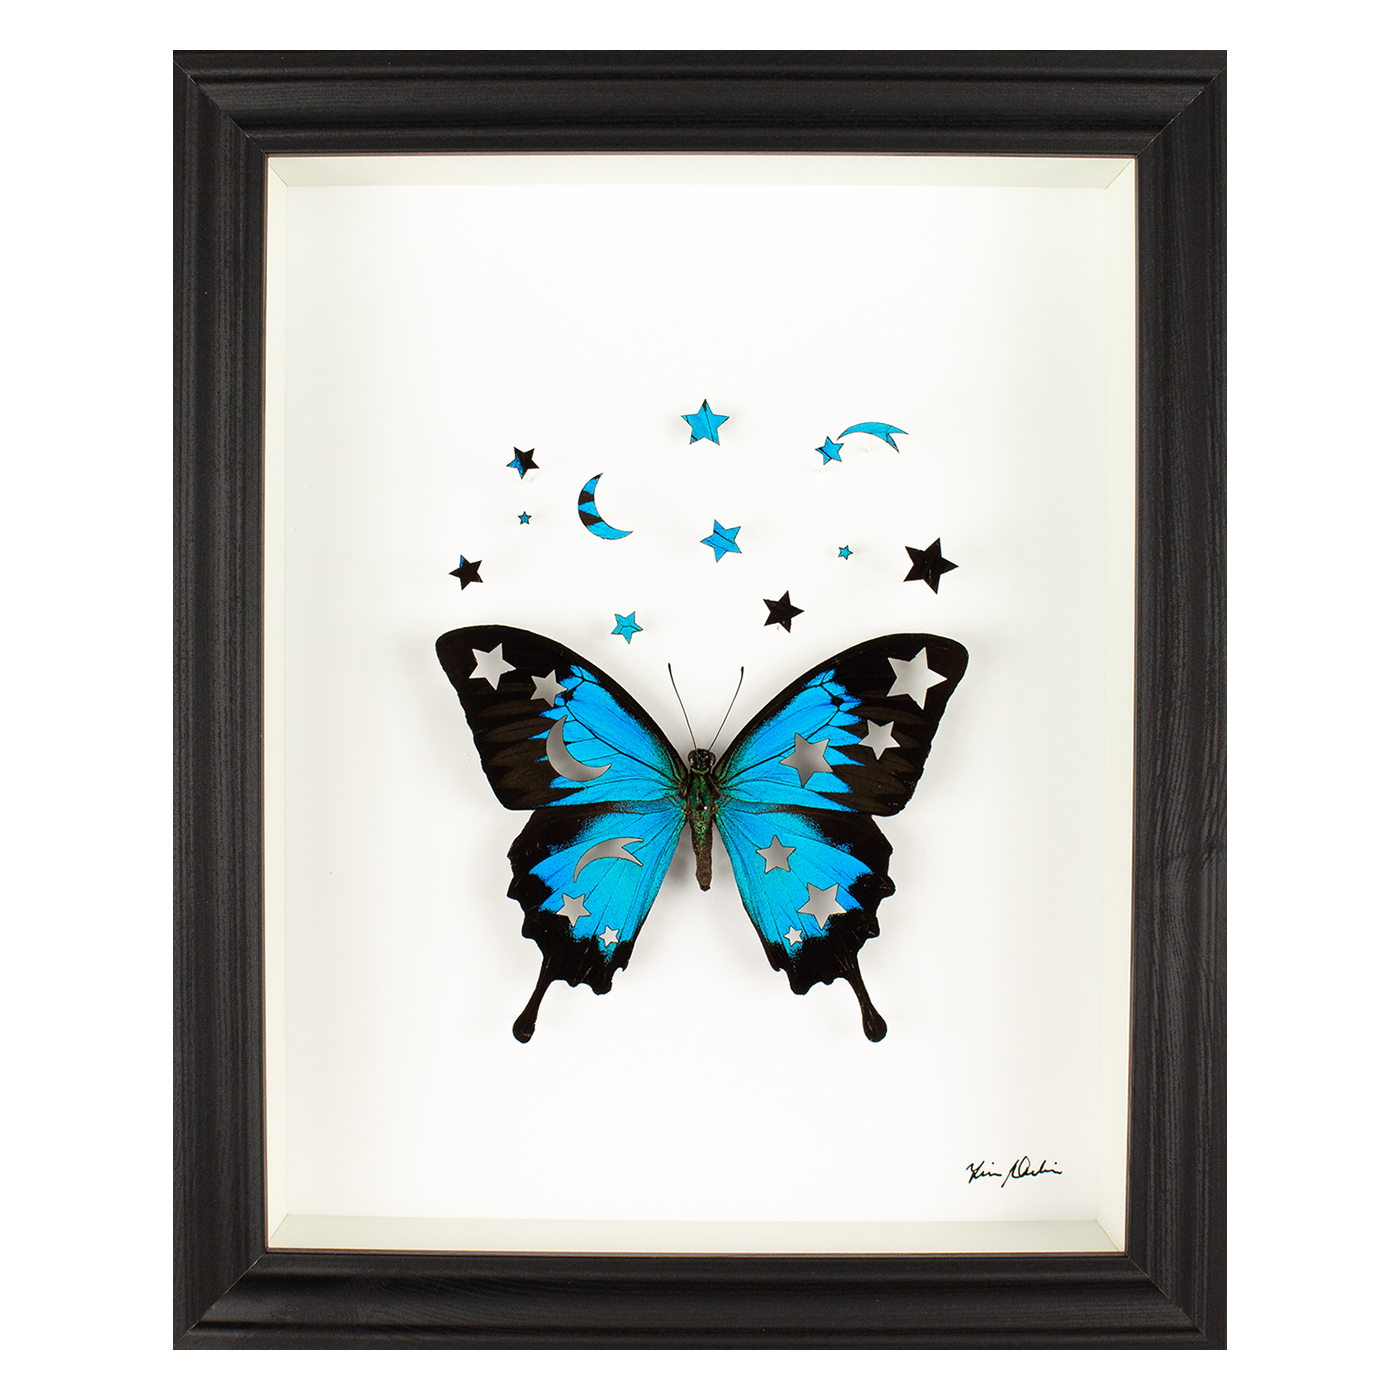 Ziggy an artwork by Fiona Parkinson made of a Papilio Ulysses butterfly